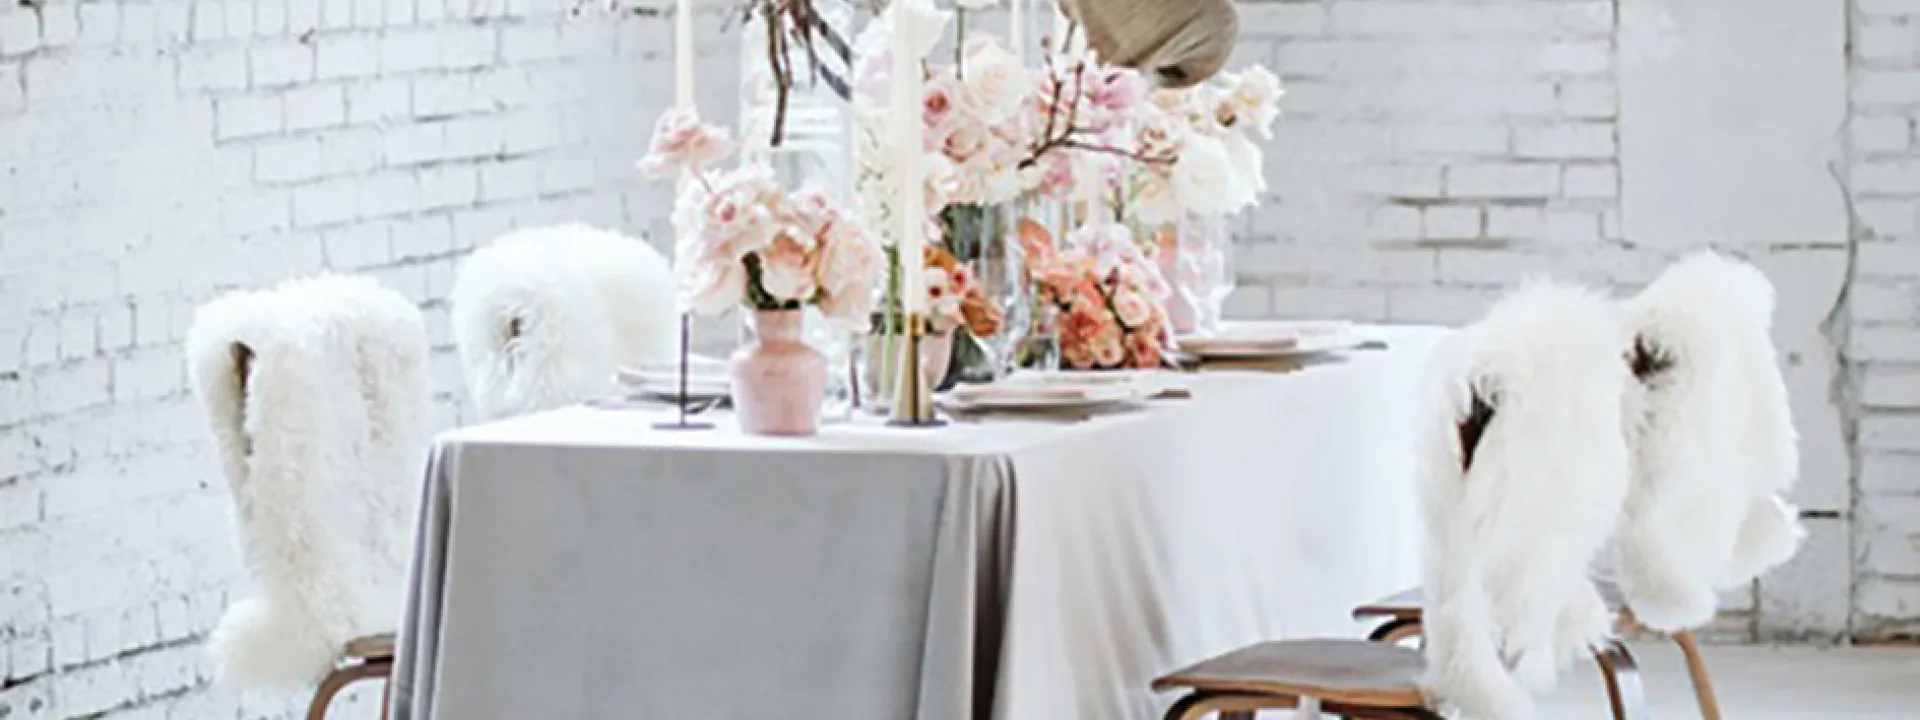 Hallea Events - Photo by Dorothy Huynh